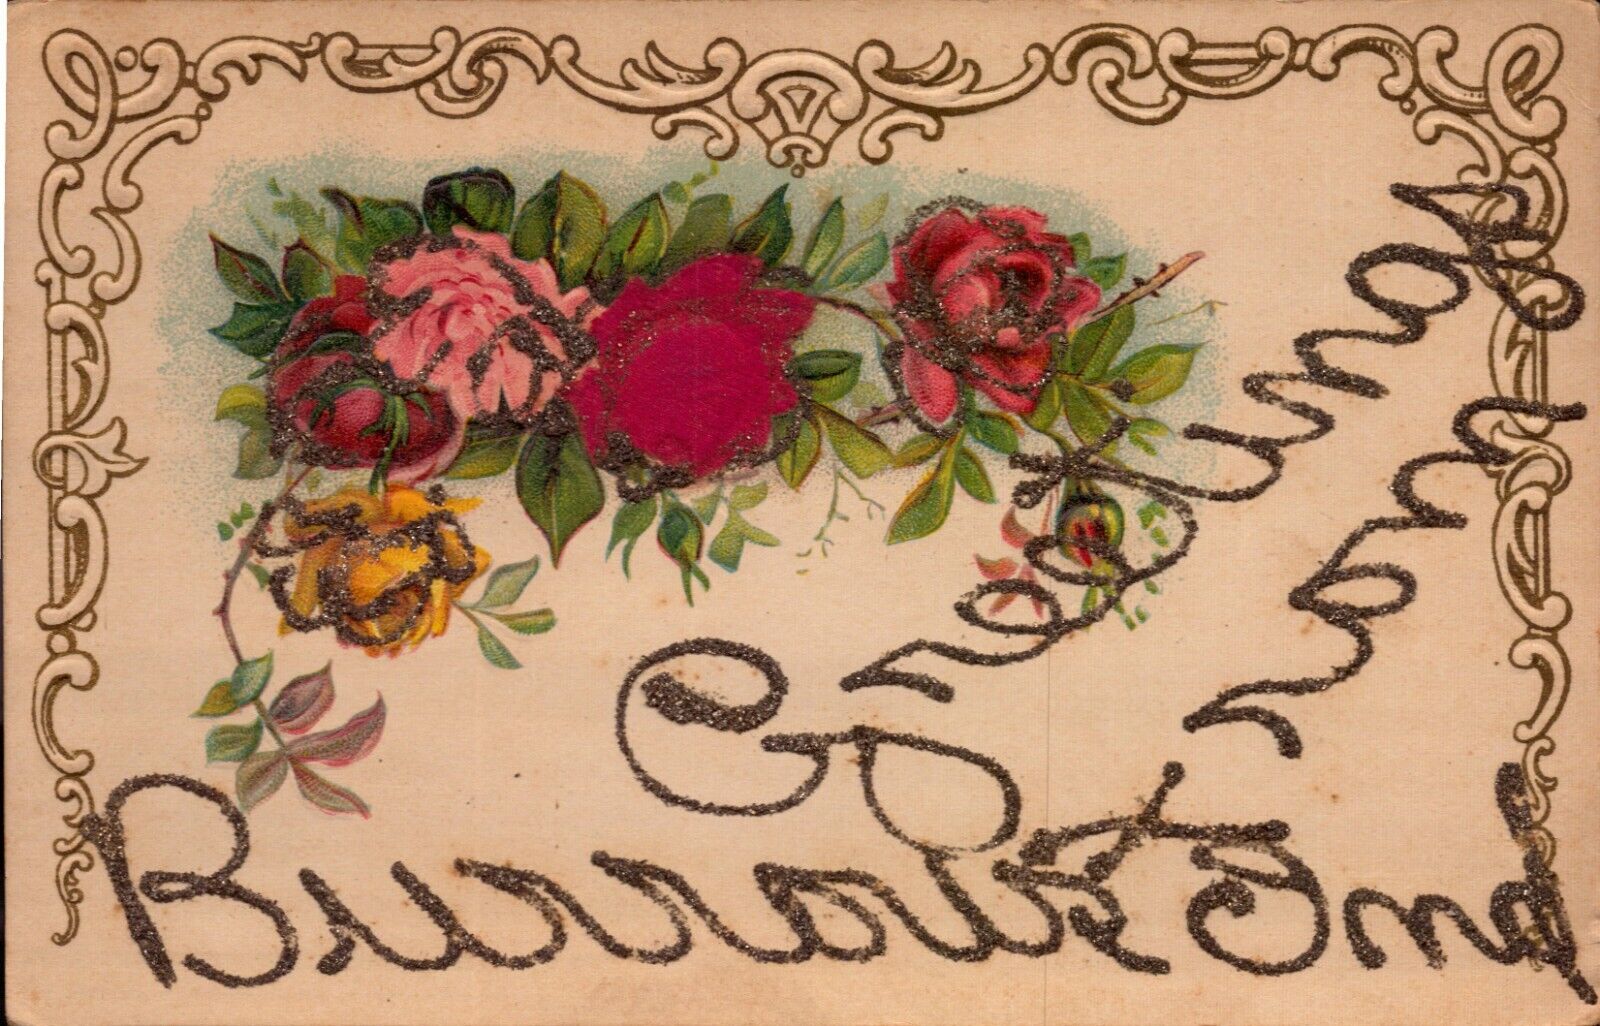 Vintage Postcard 1907 Greetings embossed with Glitter Made in Germany flowers